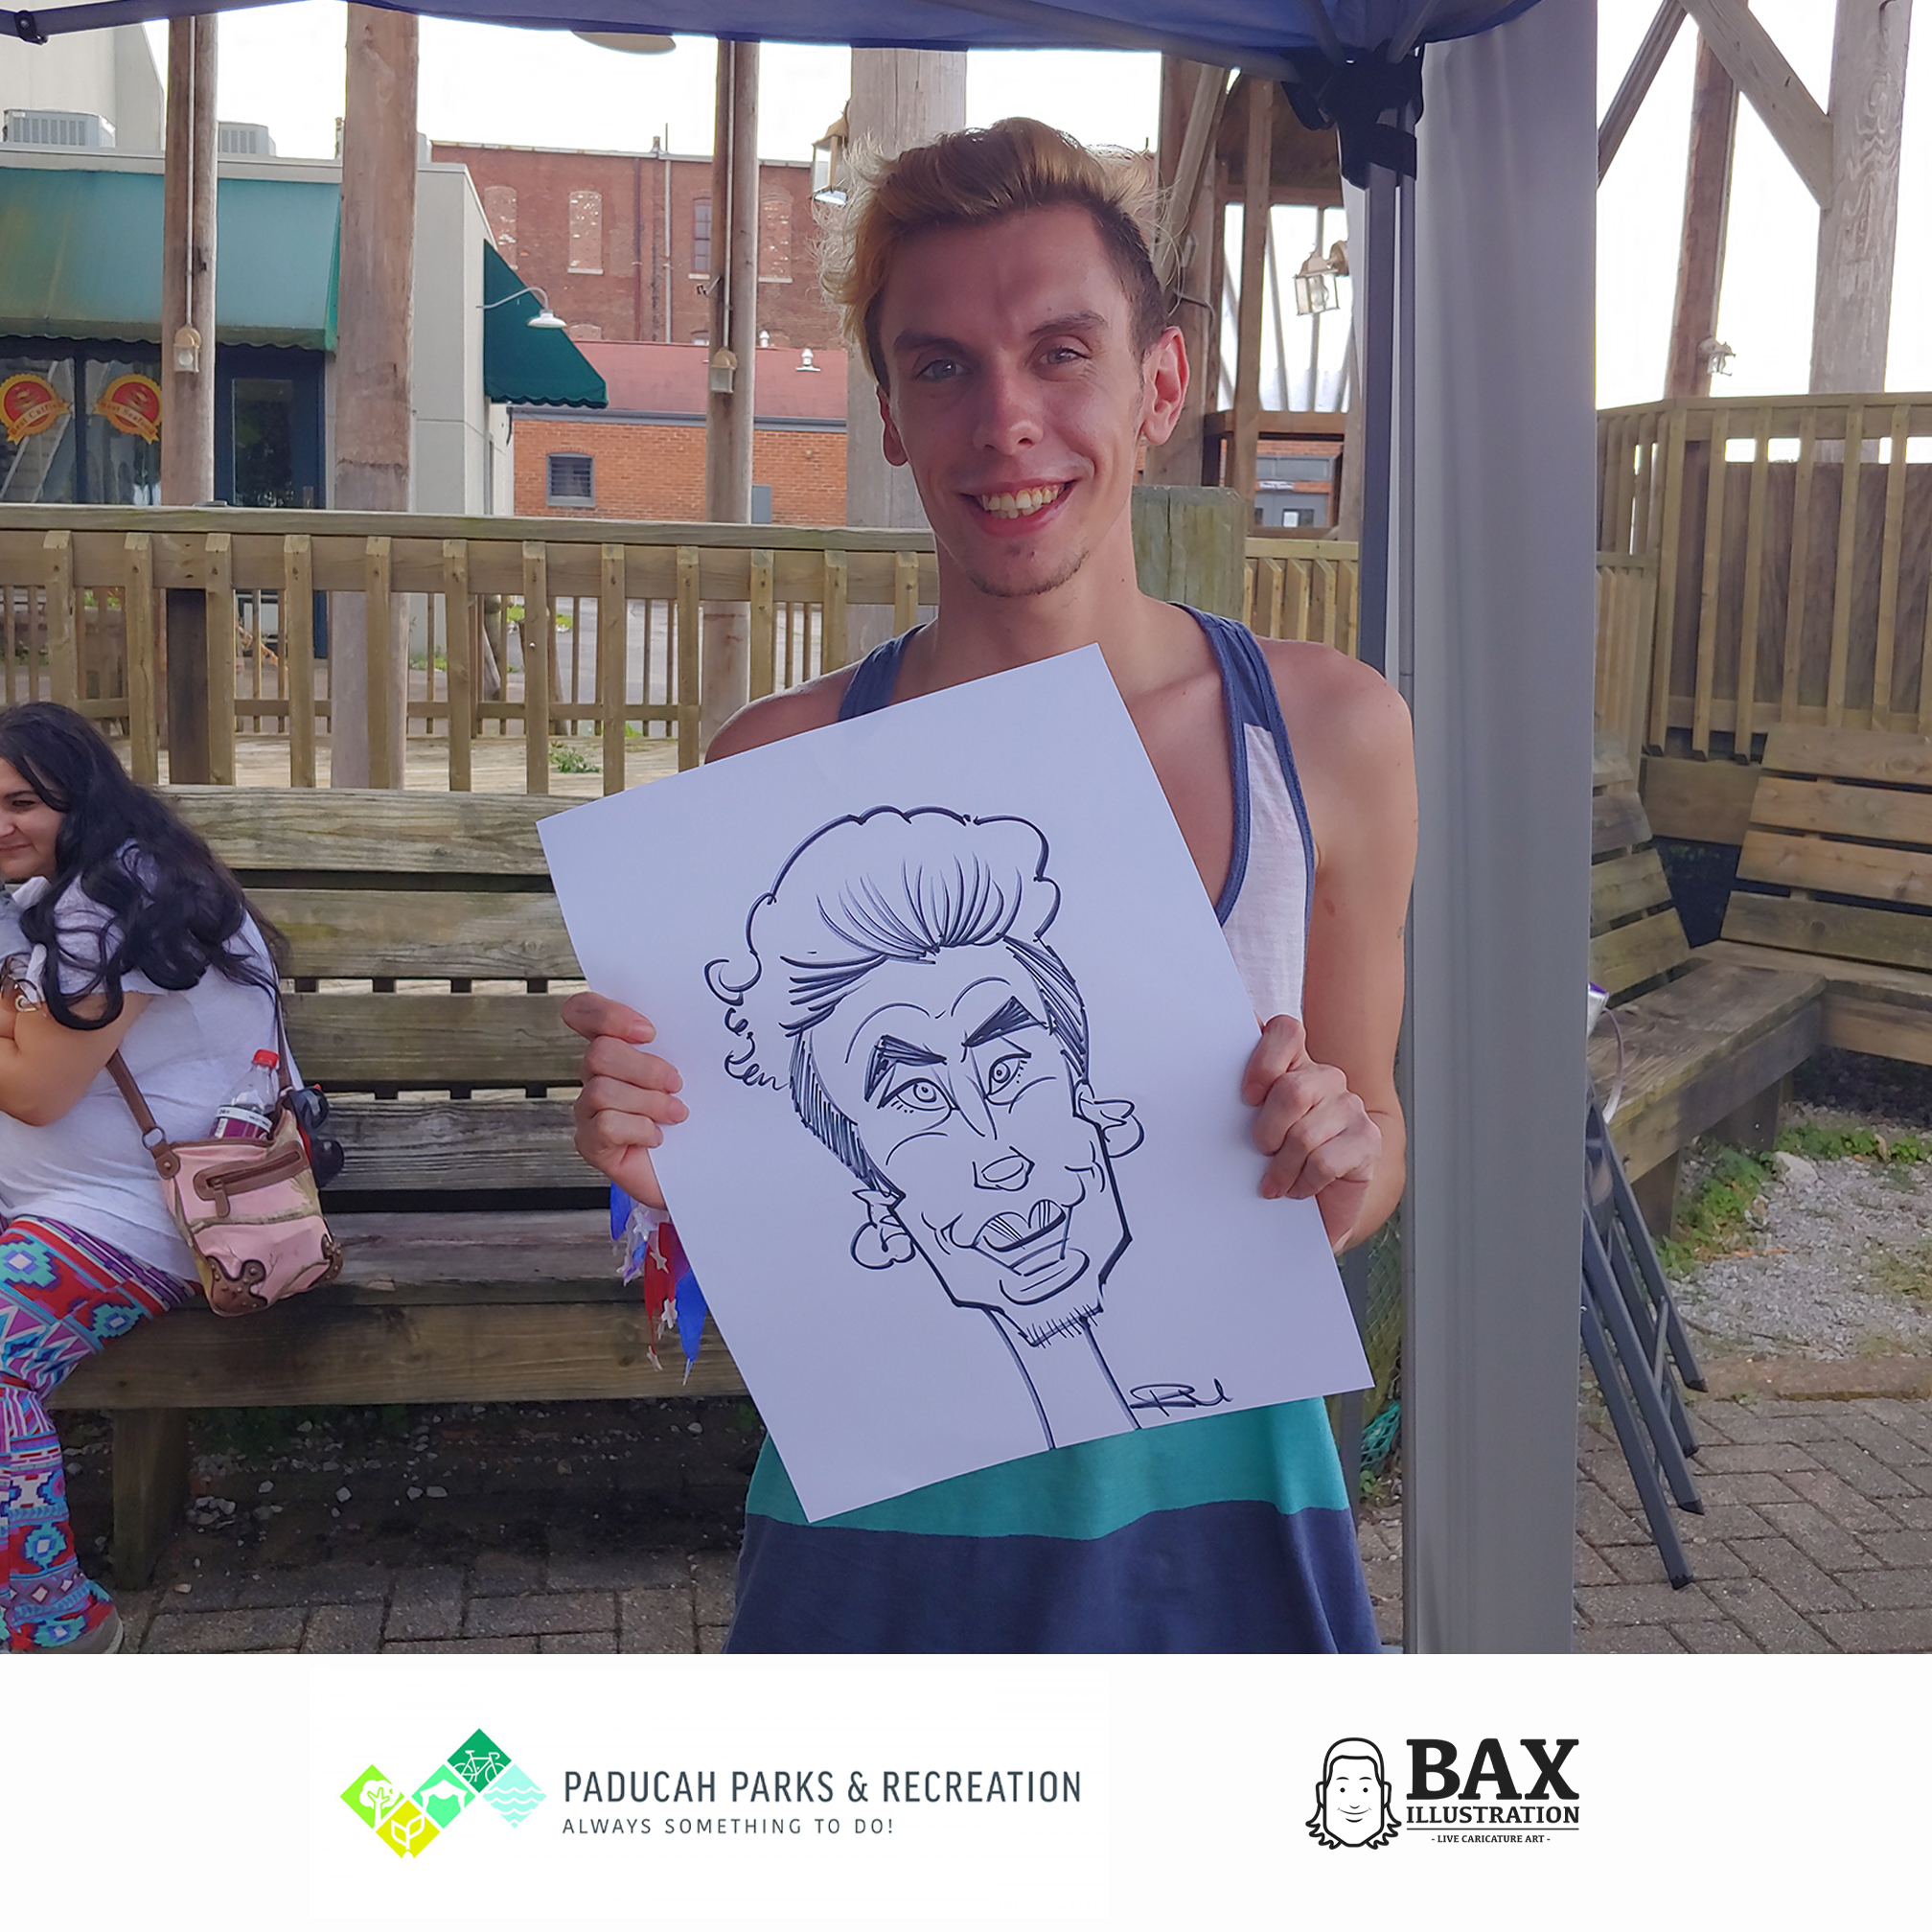 Guy holding caricature by Bax Illustration in Paducah Kentucky at the 2019 Independence Day Celebration